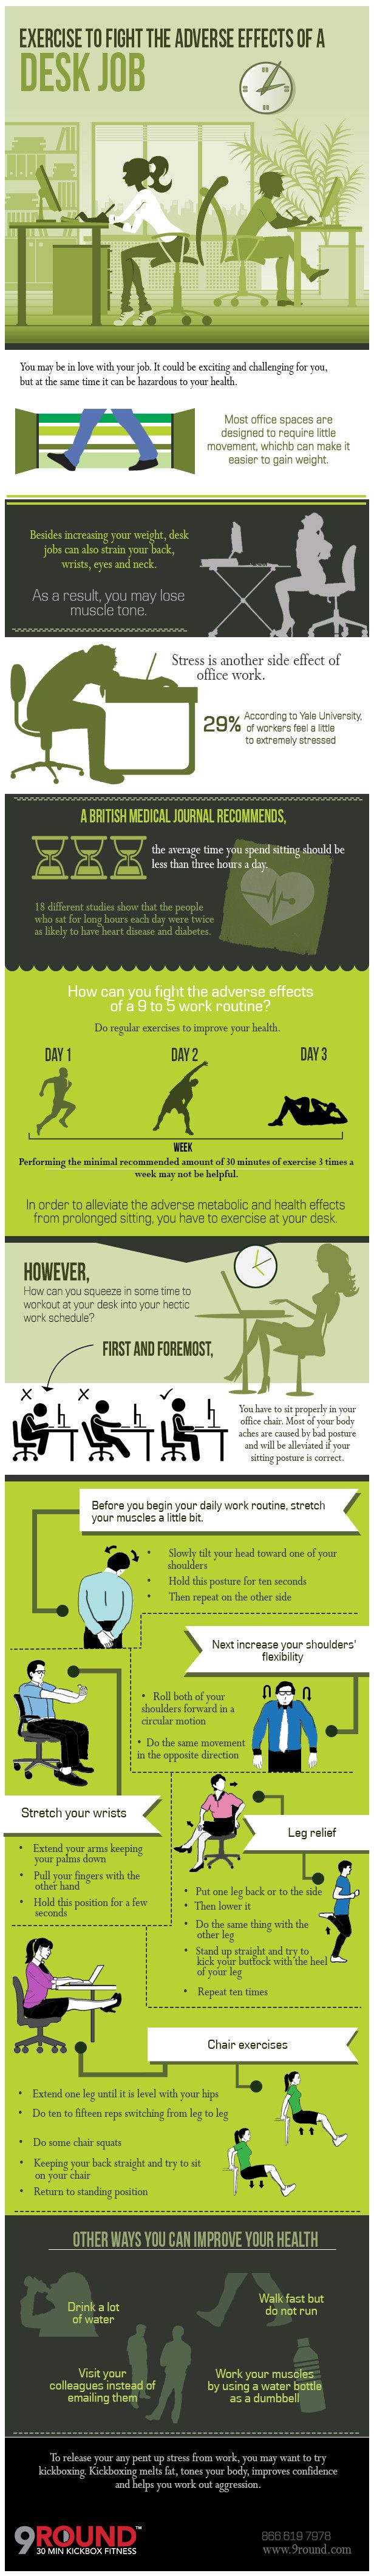 exercises to fight the adverse effects of a desk job